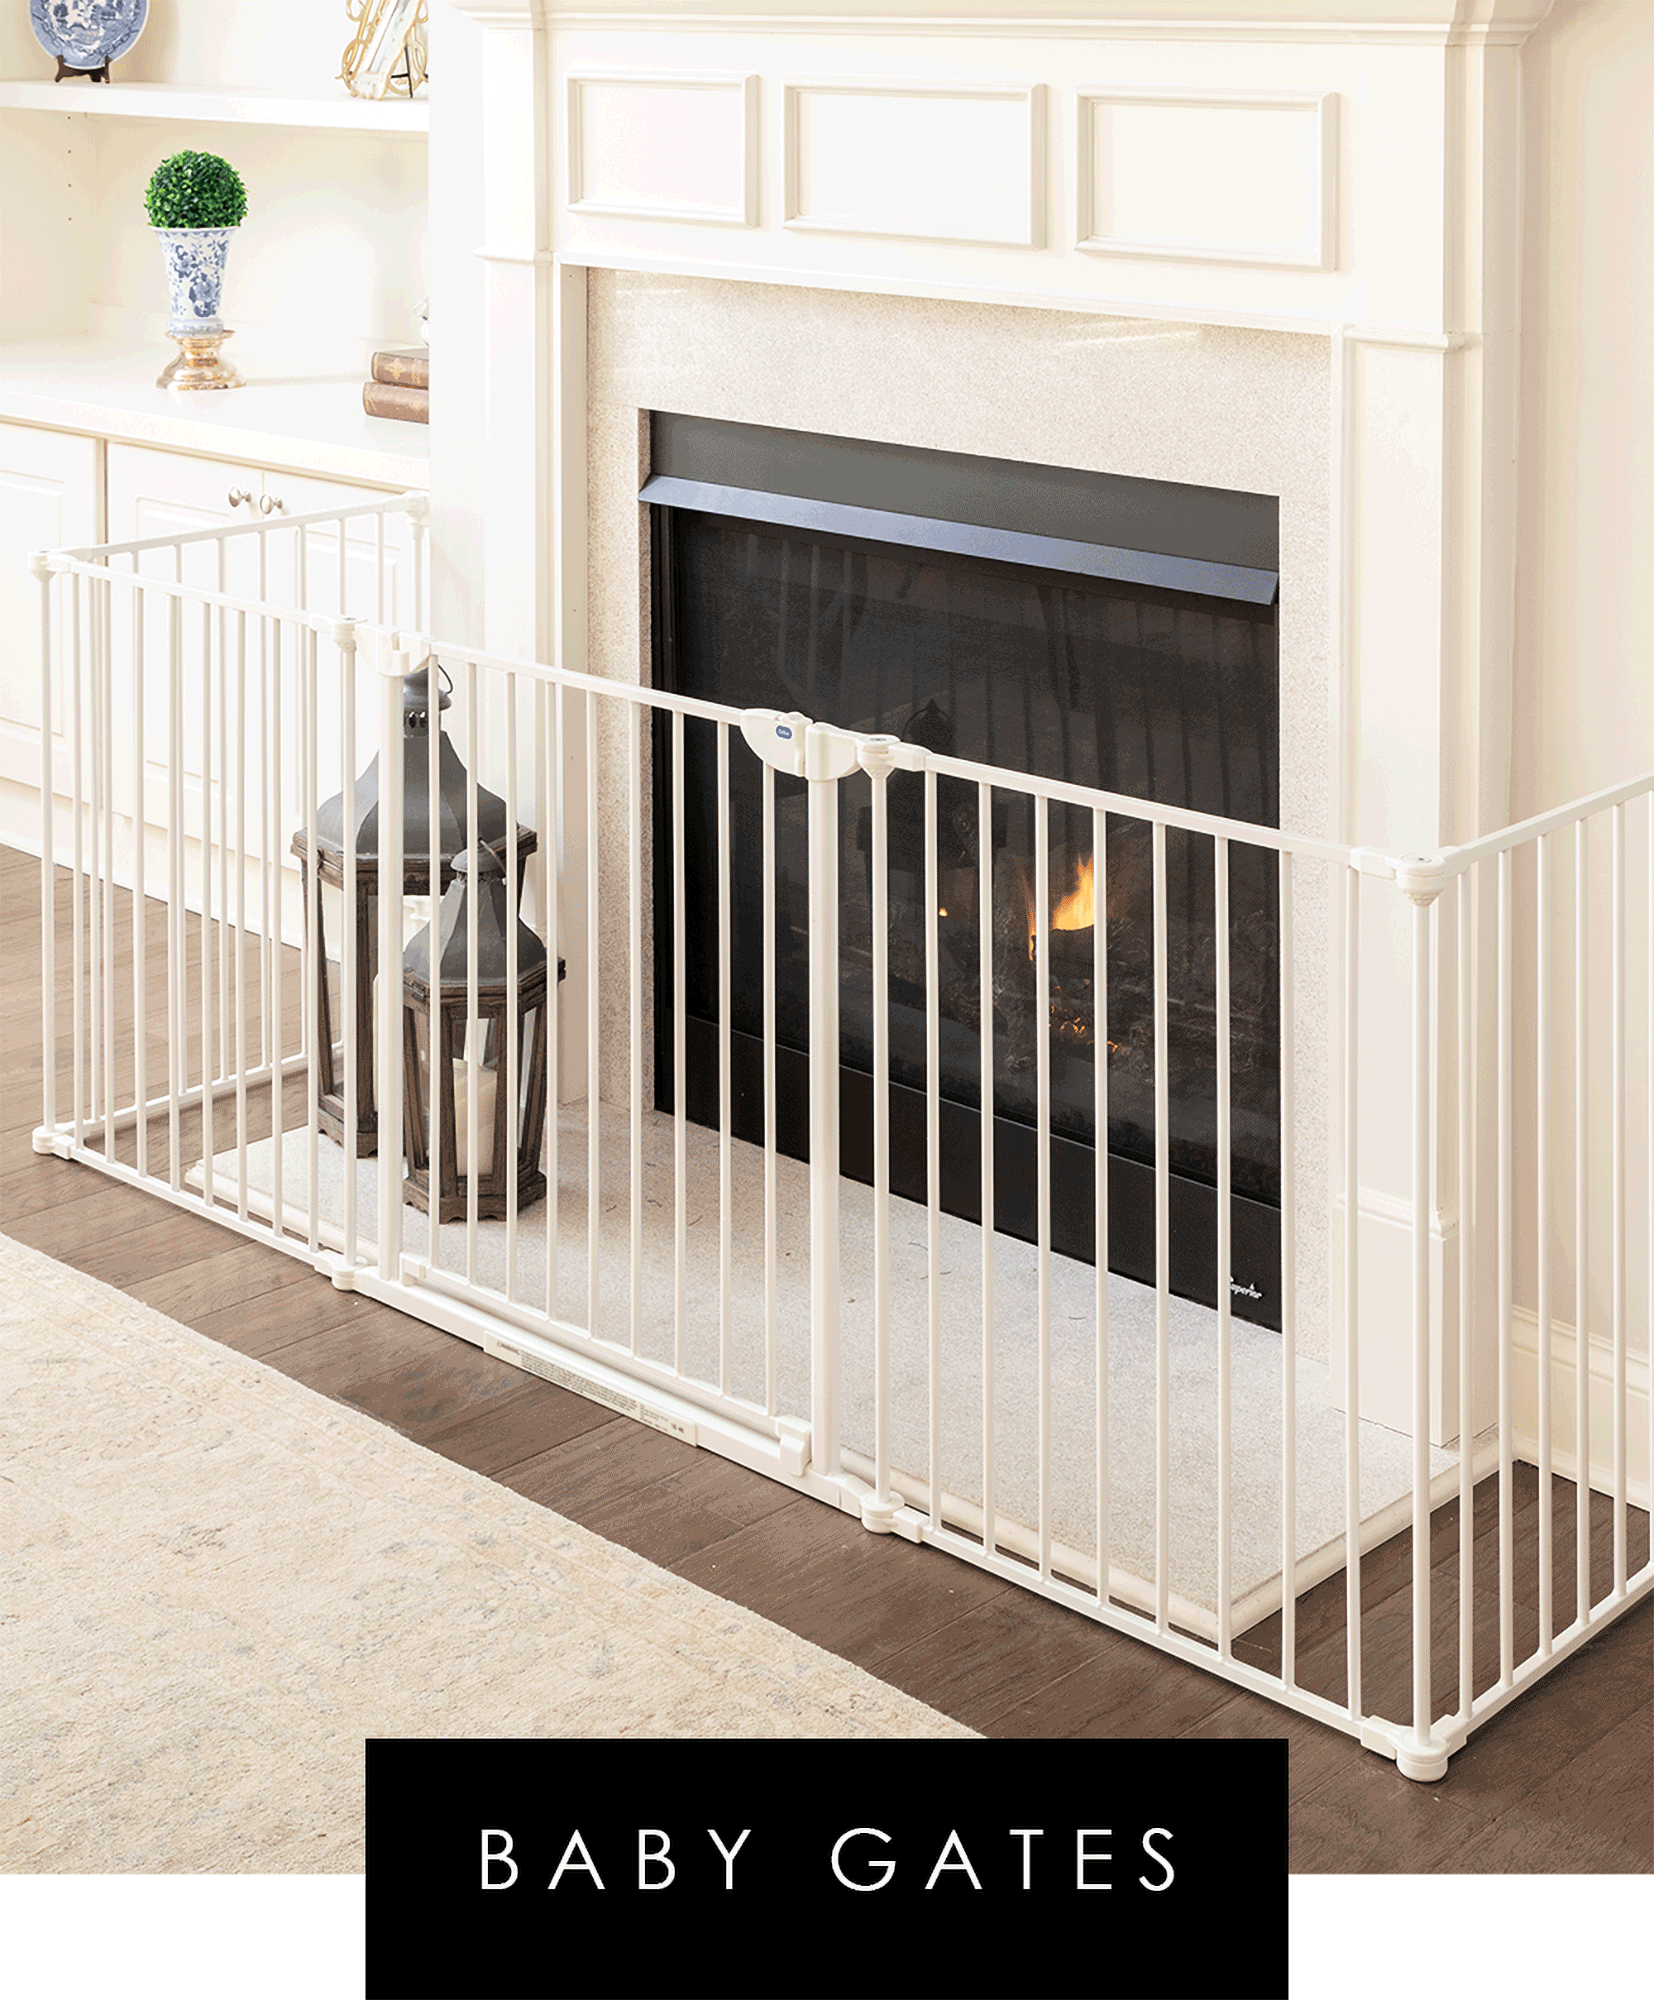 fireplace gate for baby proofing